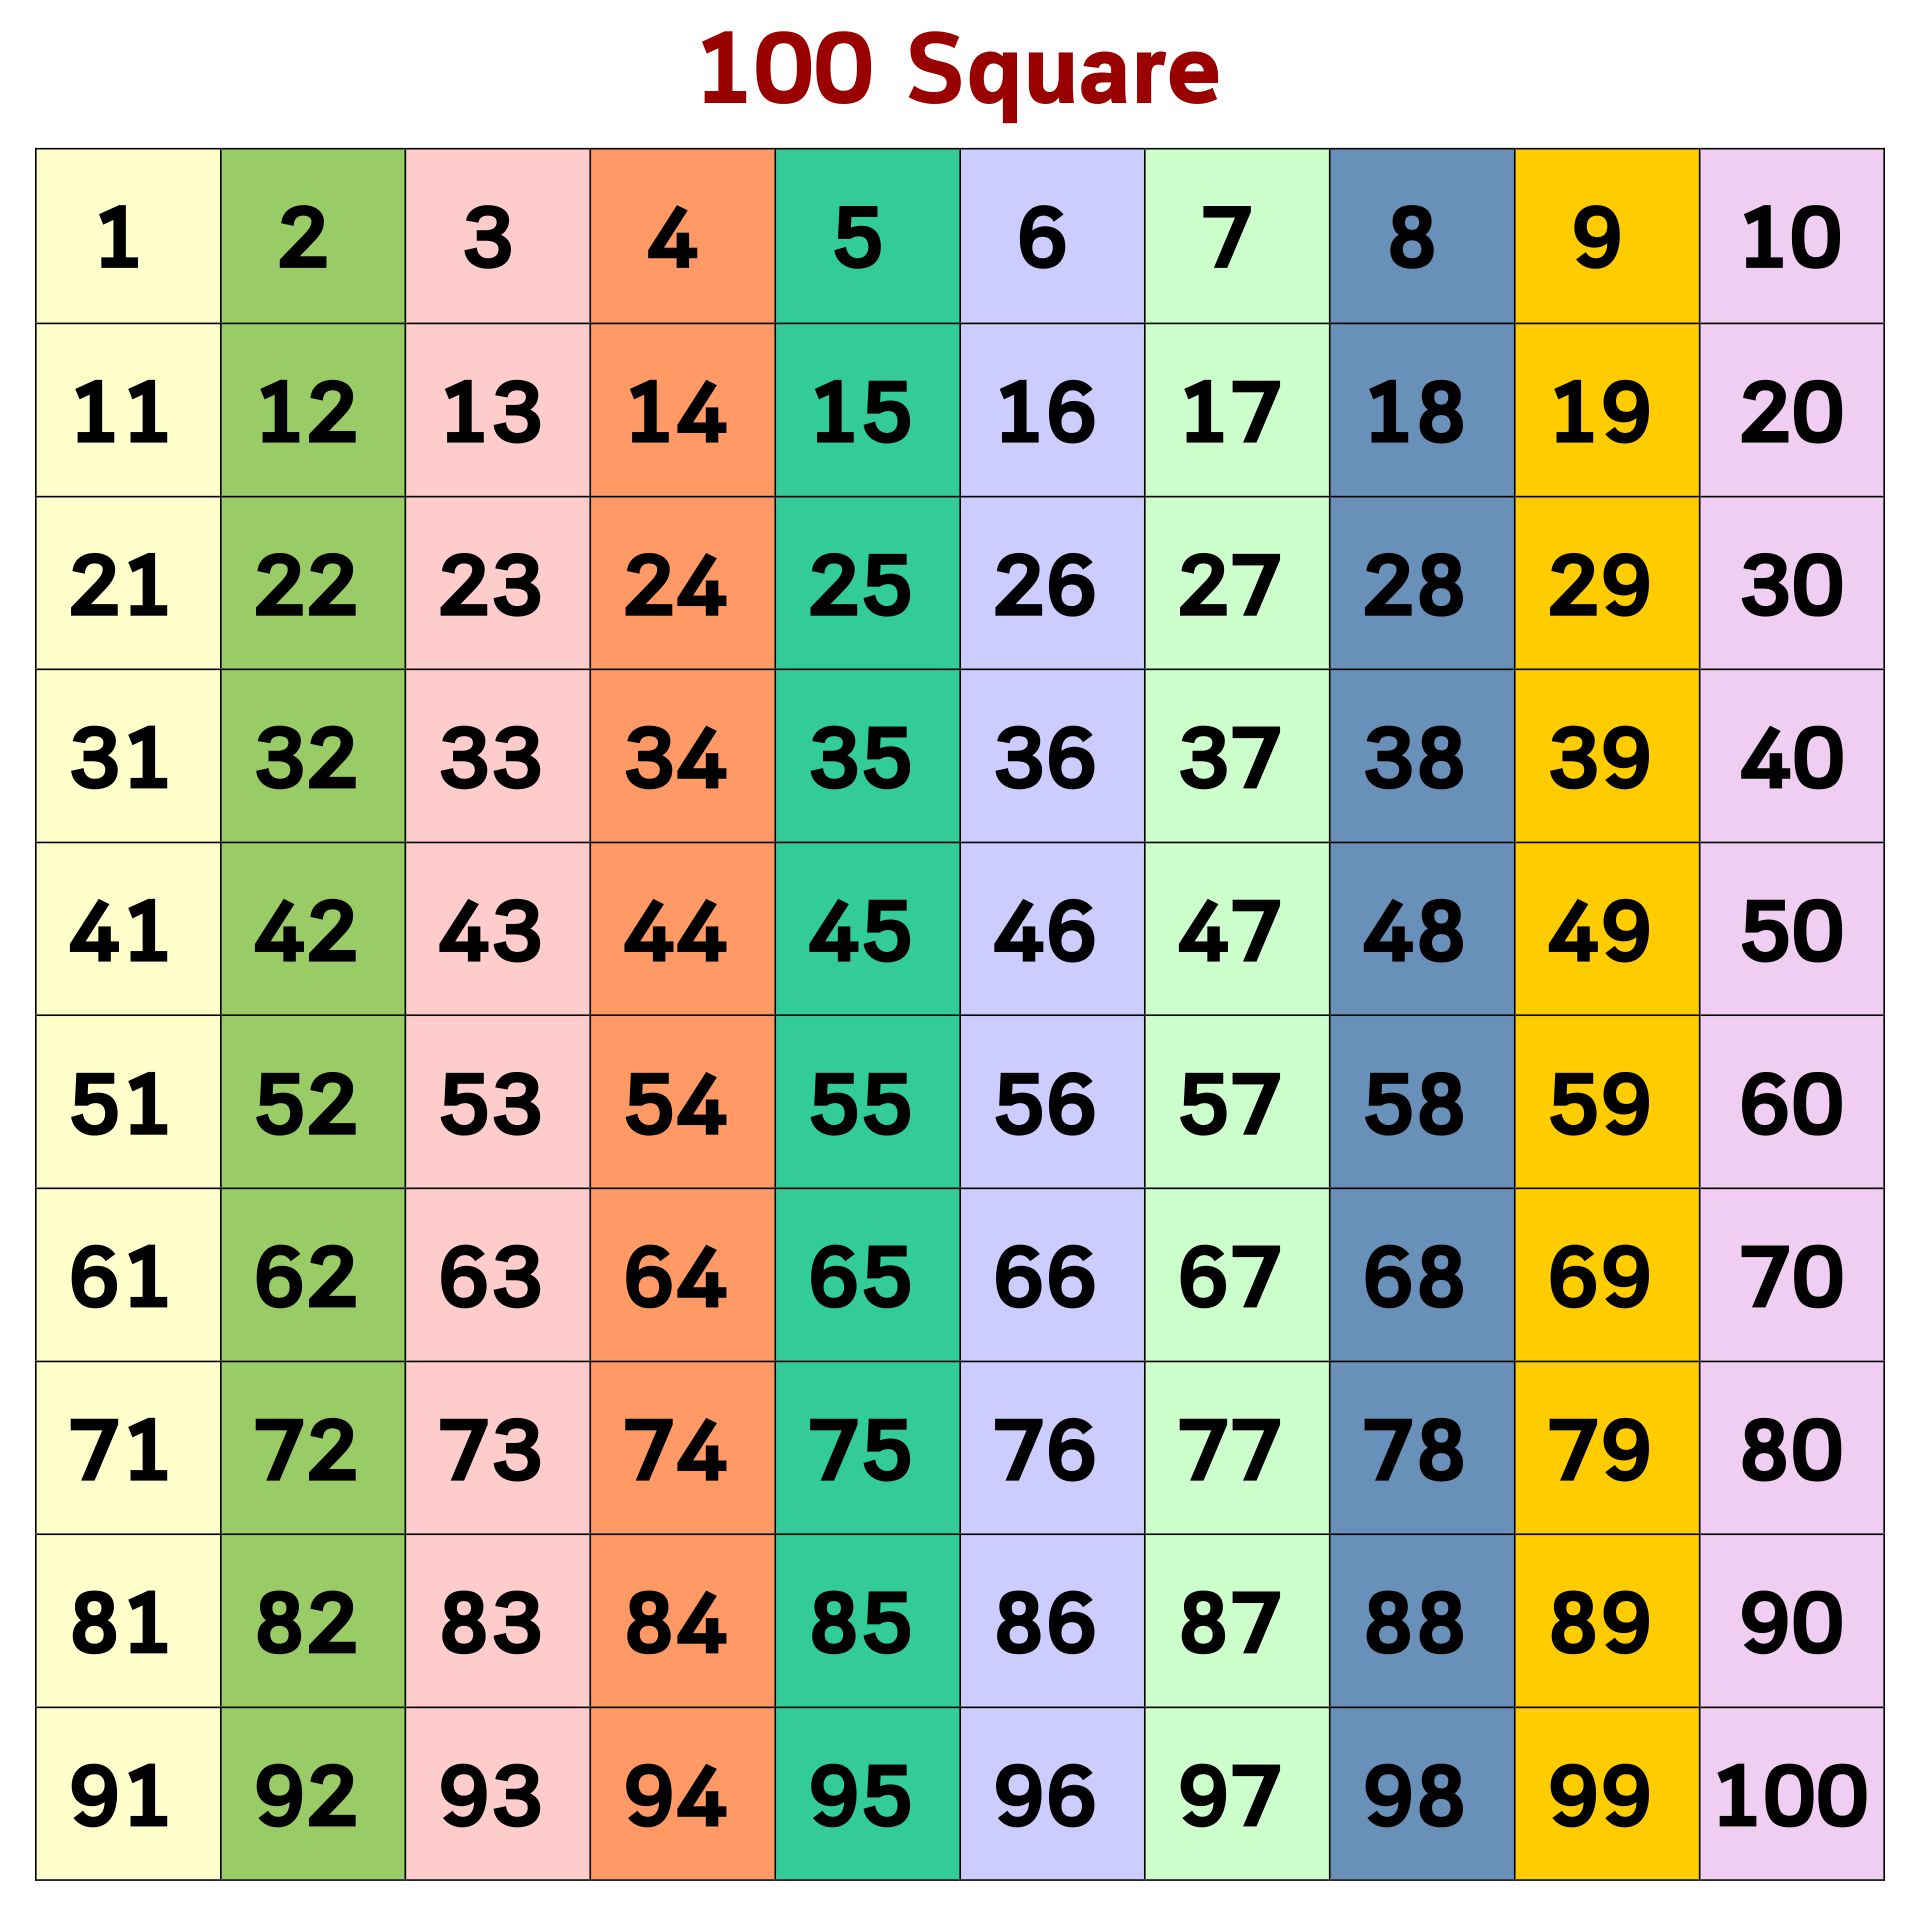 100 Square Grid With Numbers